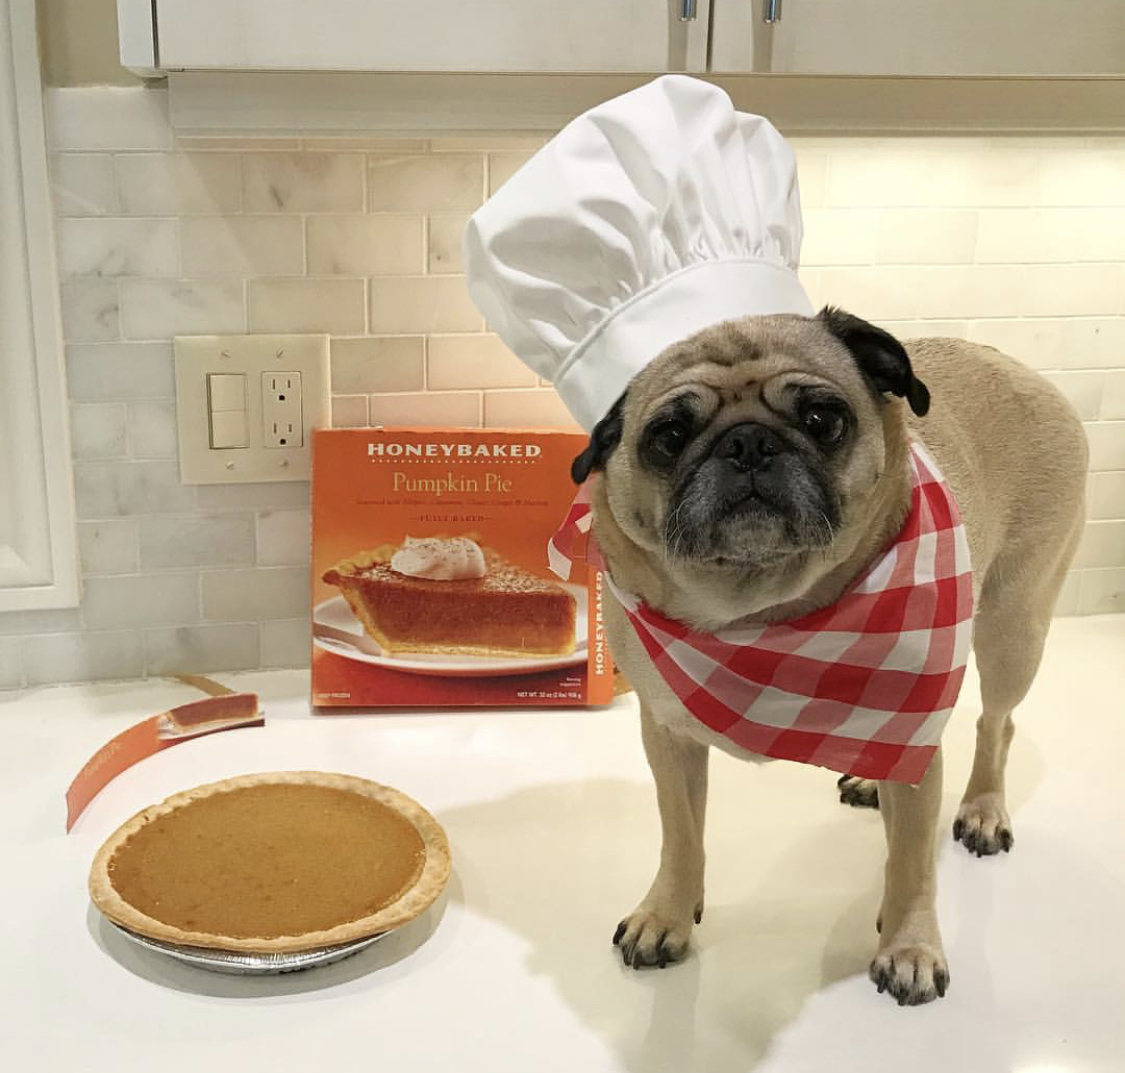 Pug wearing a chef hat on top of the counter with a pie